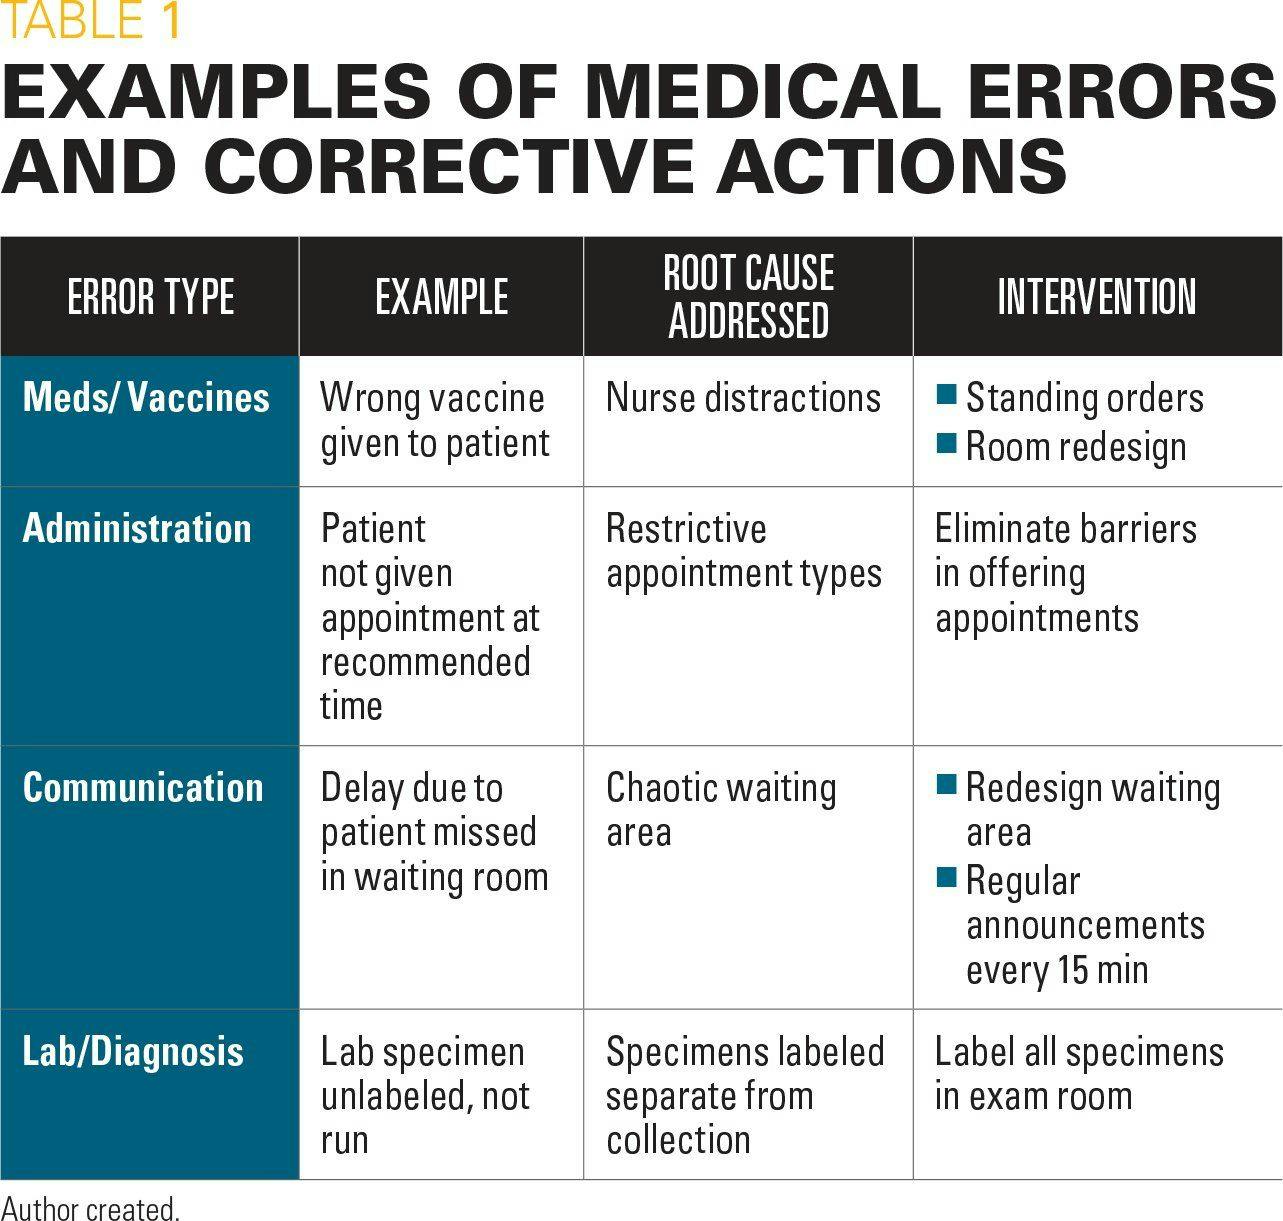 Examples of medical errors and corrective actions